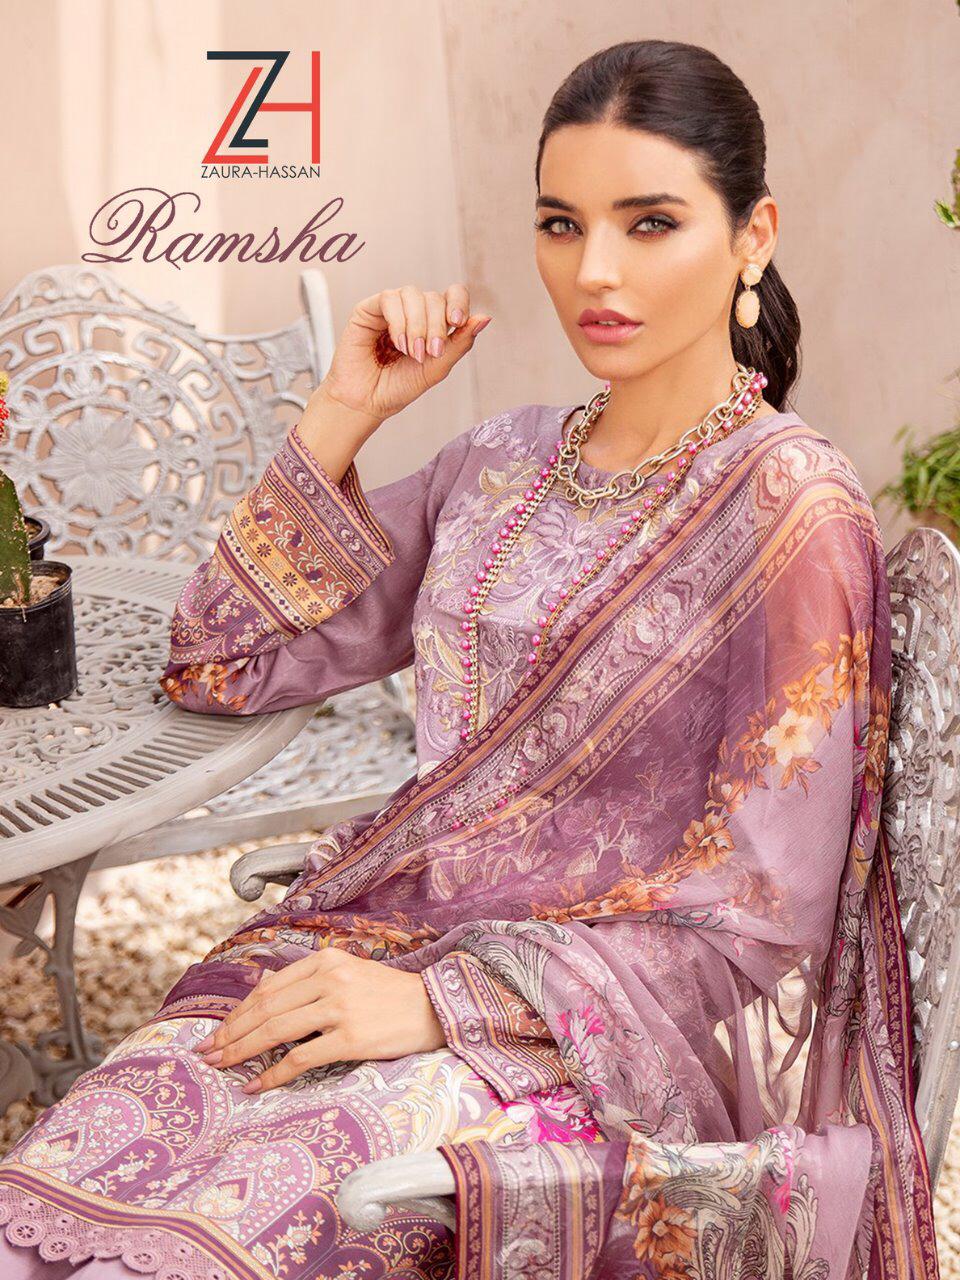 Zaura Hassan Ramsha Printed Pure Jam Cotton With Embroidery ...